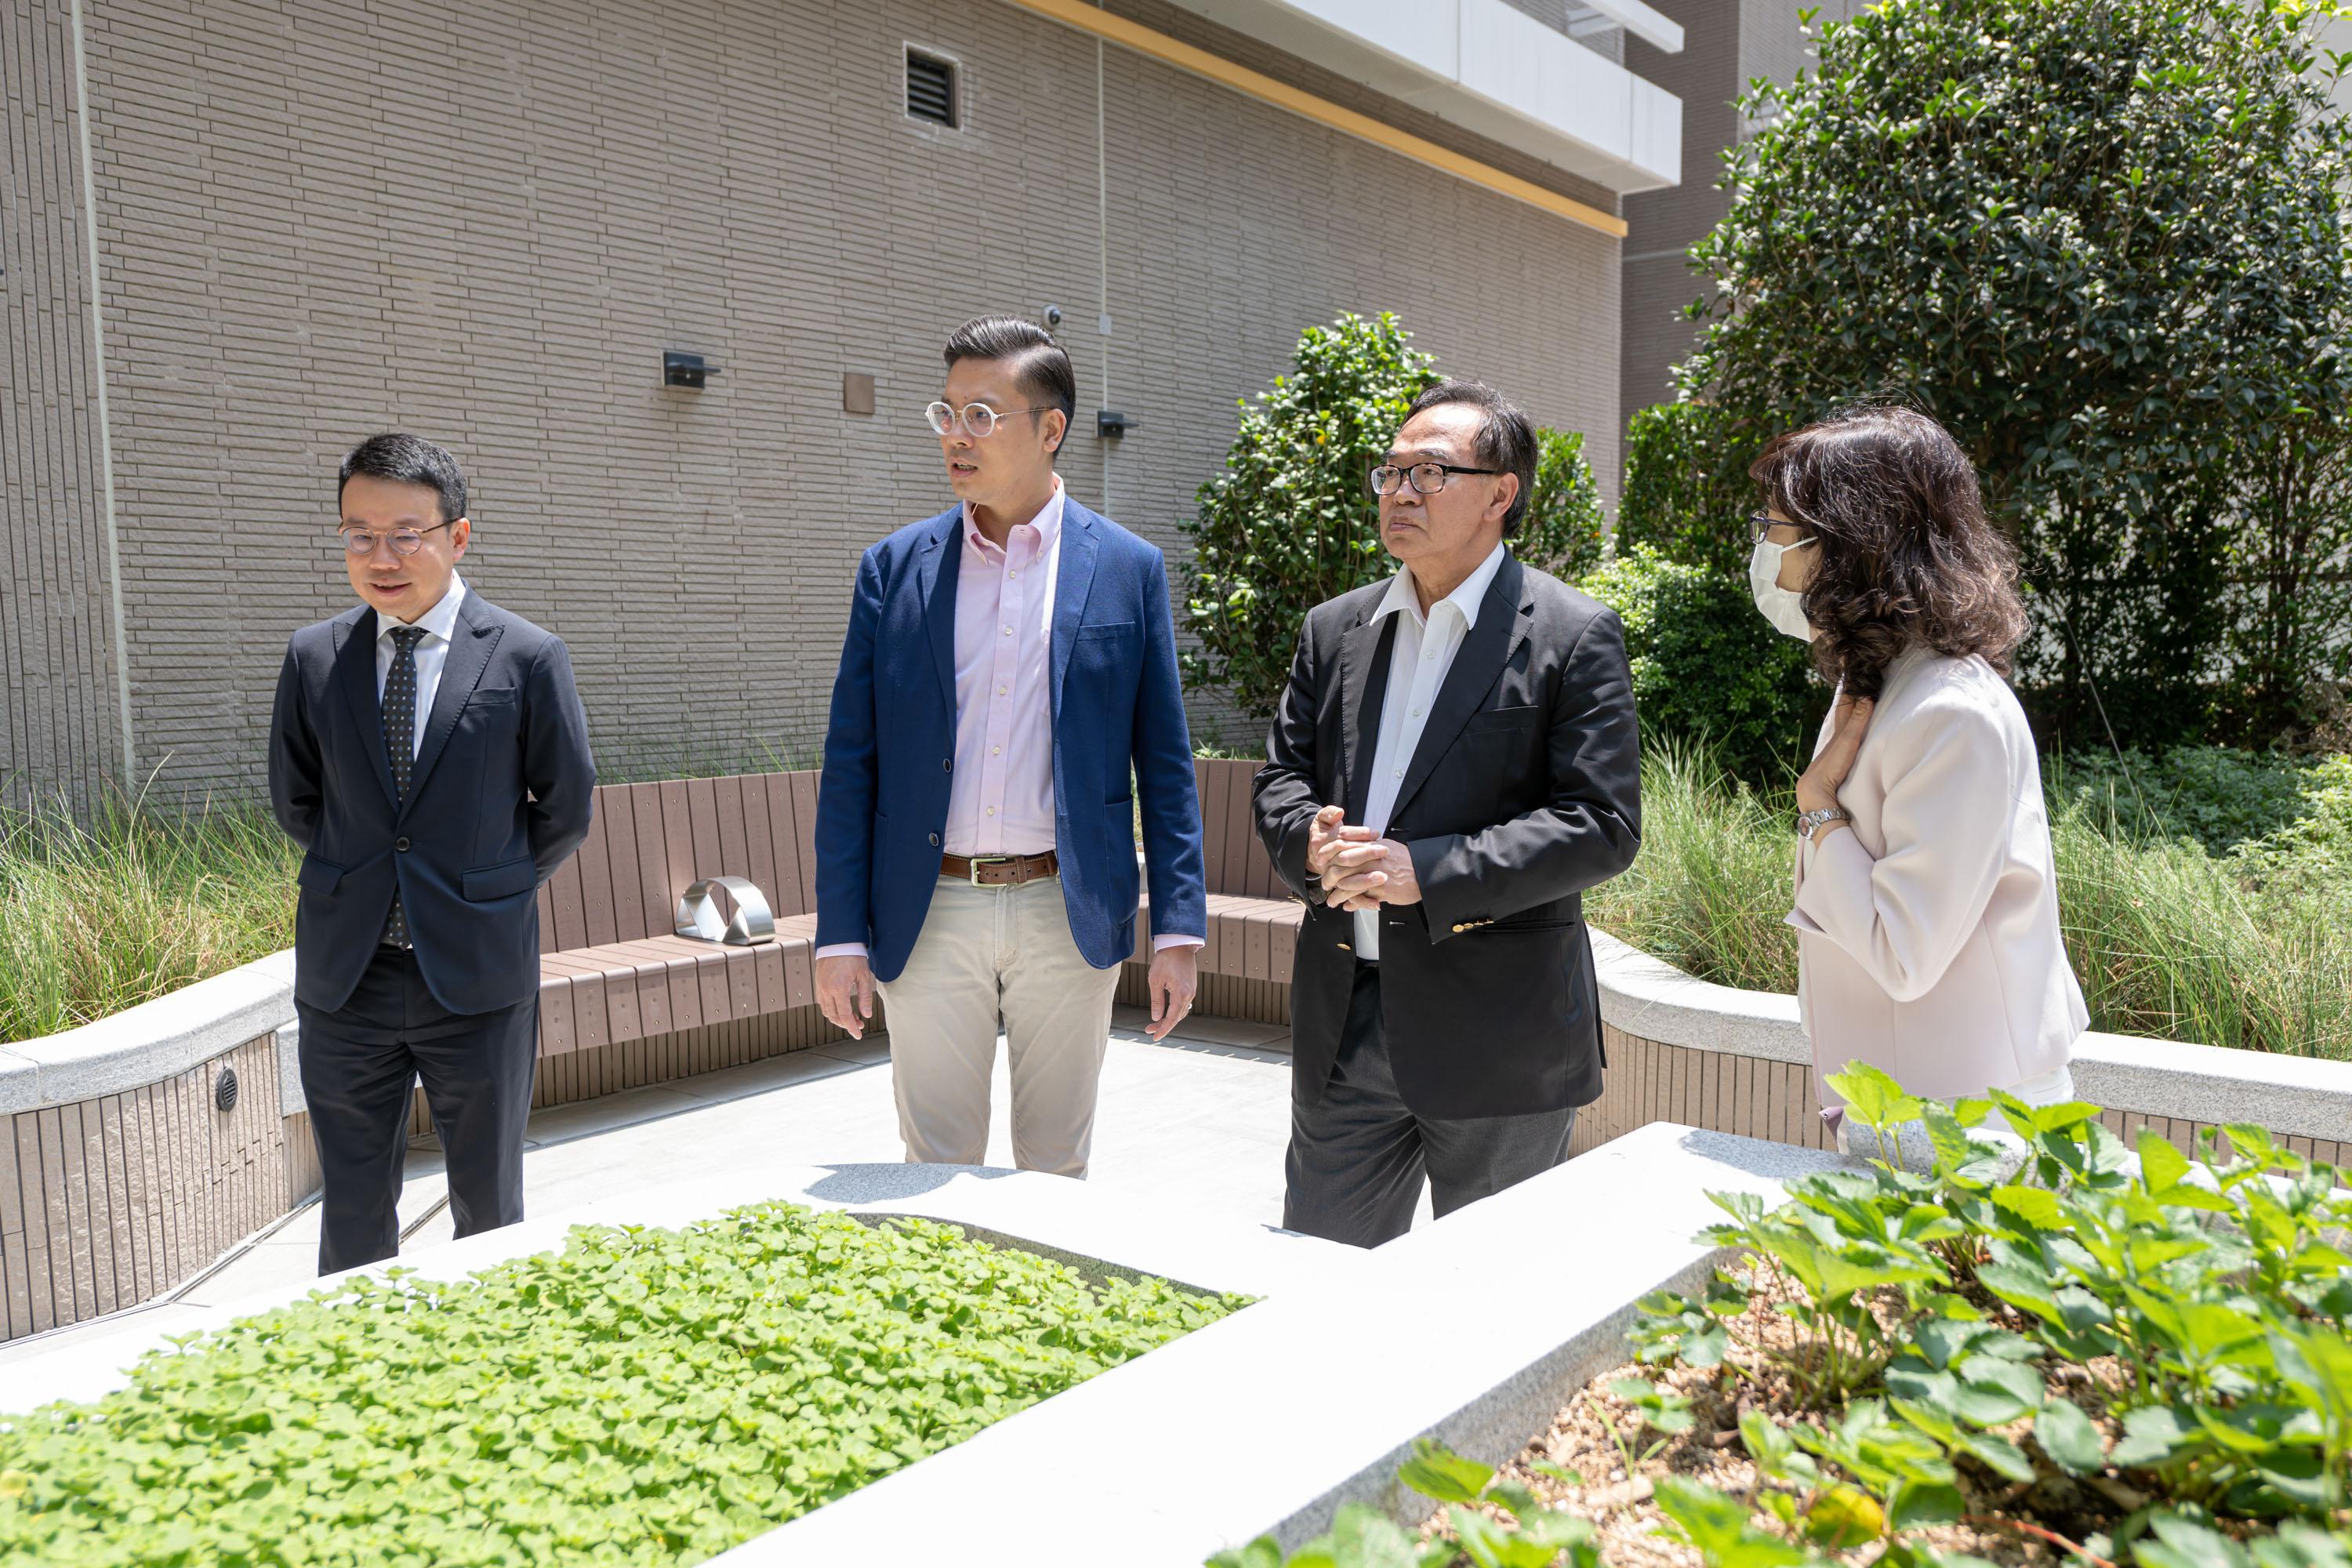 The Legislative Council (LegCo) Panel on Housing visited the Blissful Place of the Hong Kong Housing Society in Hung Hom today (June 2). Photo shows LegCo Members toured the sky garden of the Blissful Place.